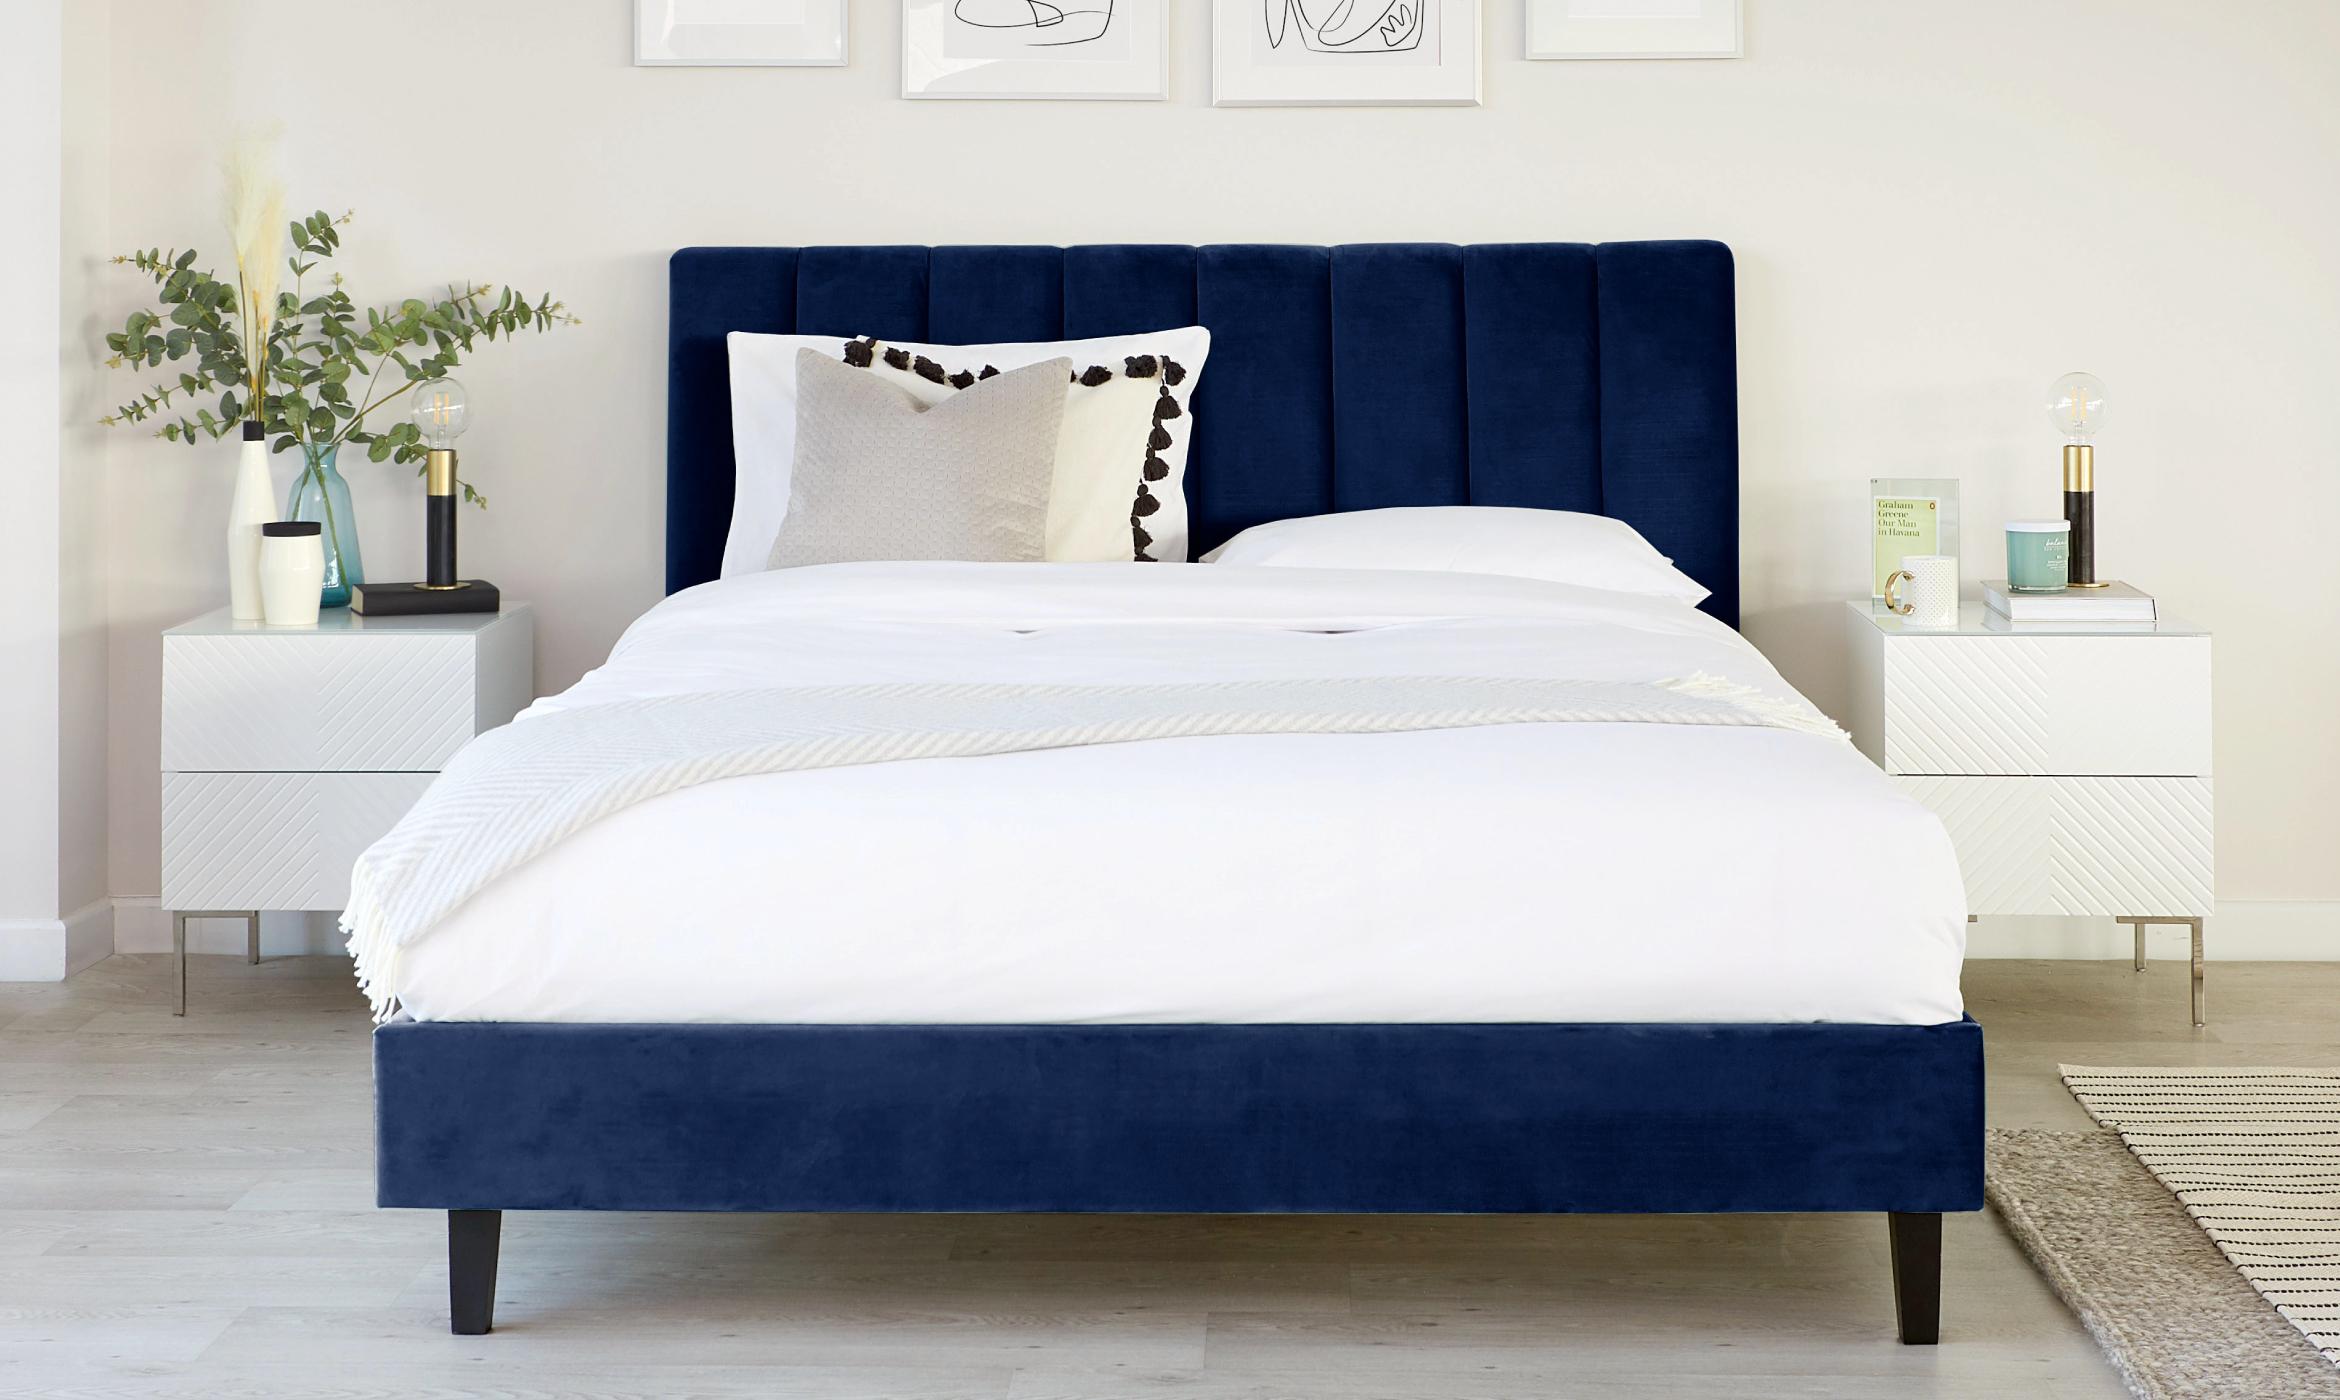 Give your bedroom a new look for less